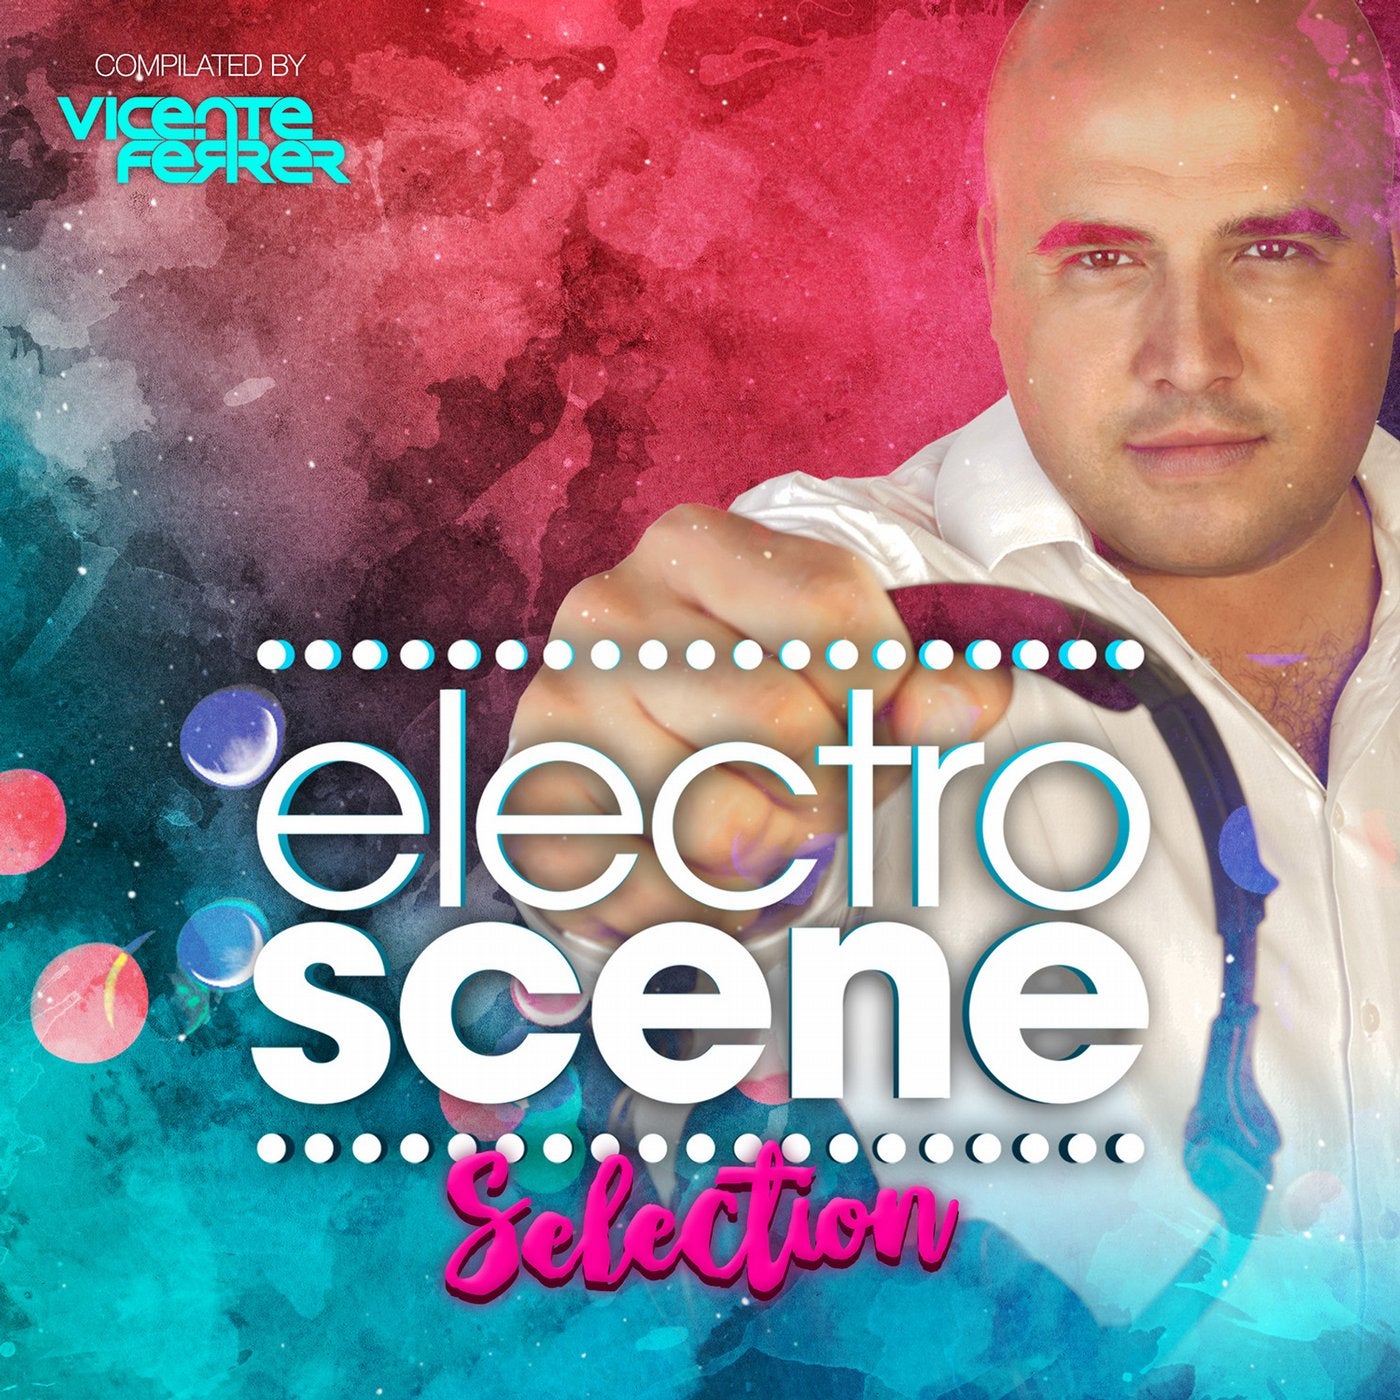 Electroscene Selection Compilated By Vicente Ferrer